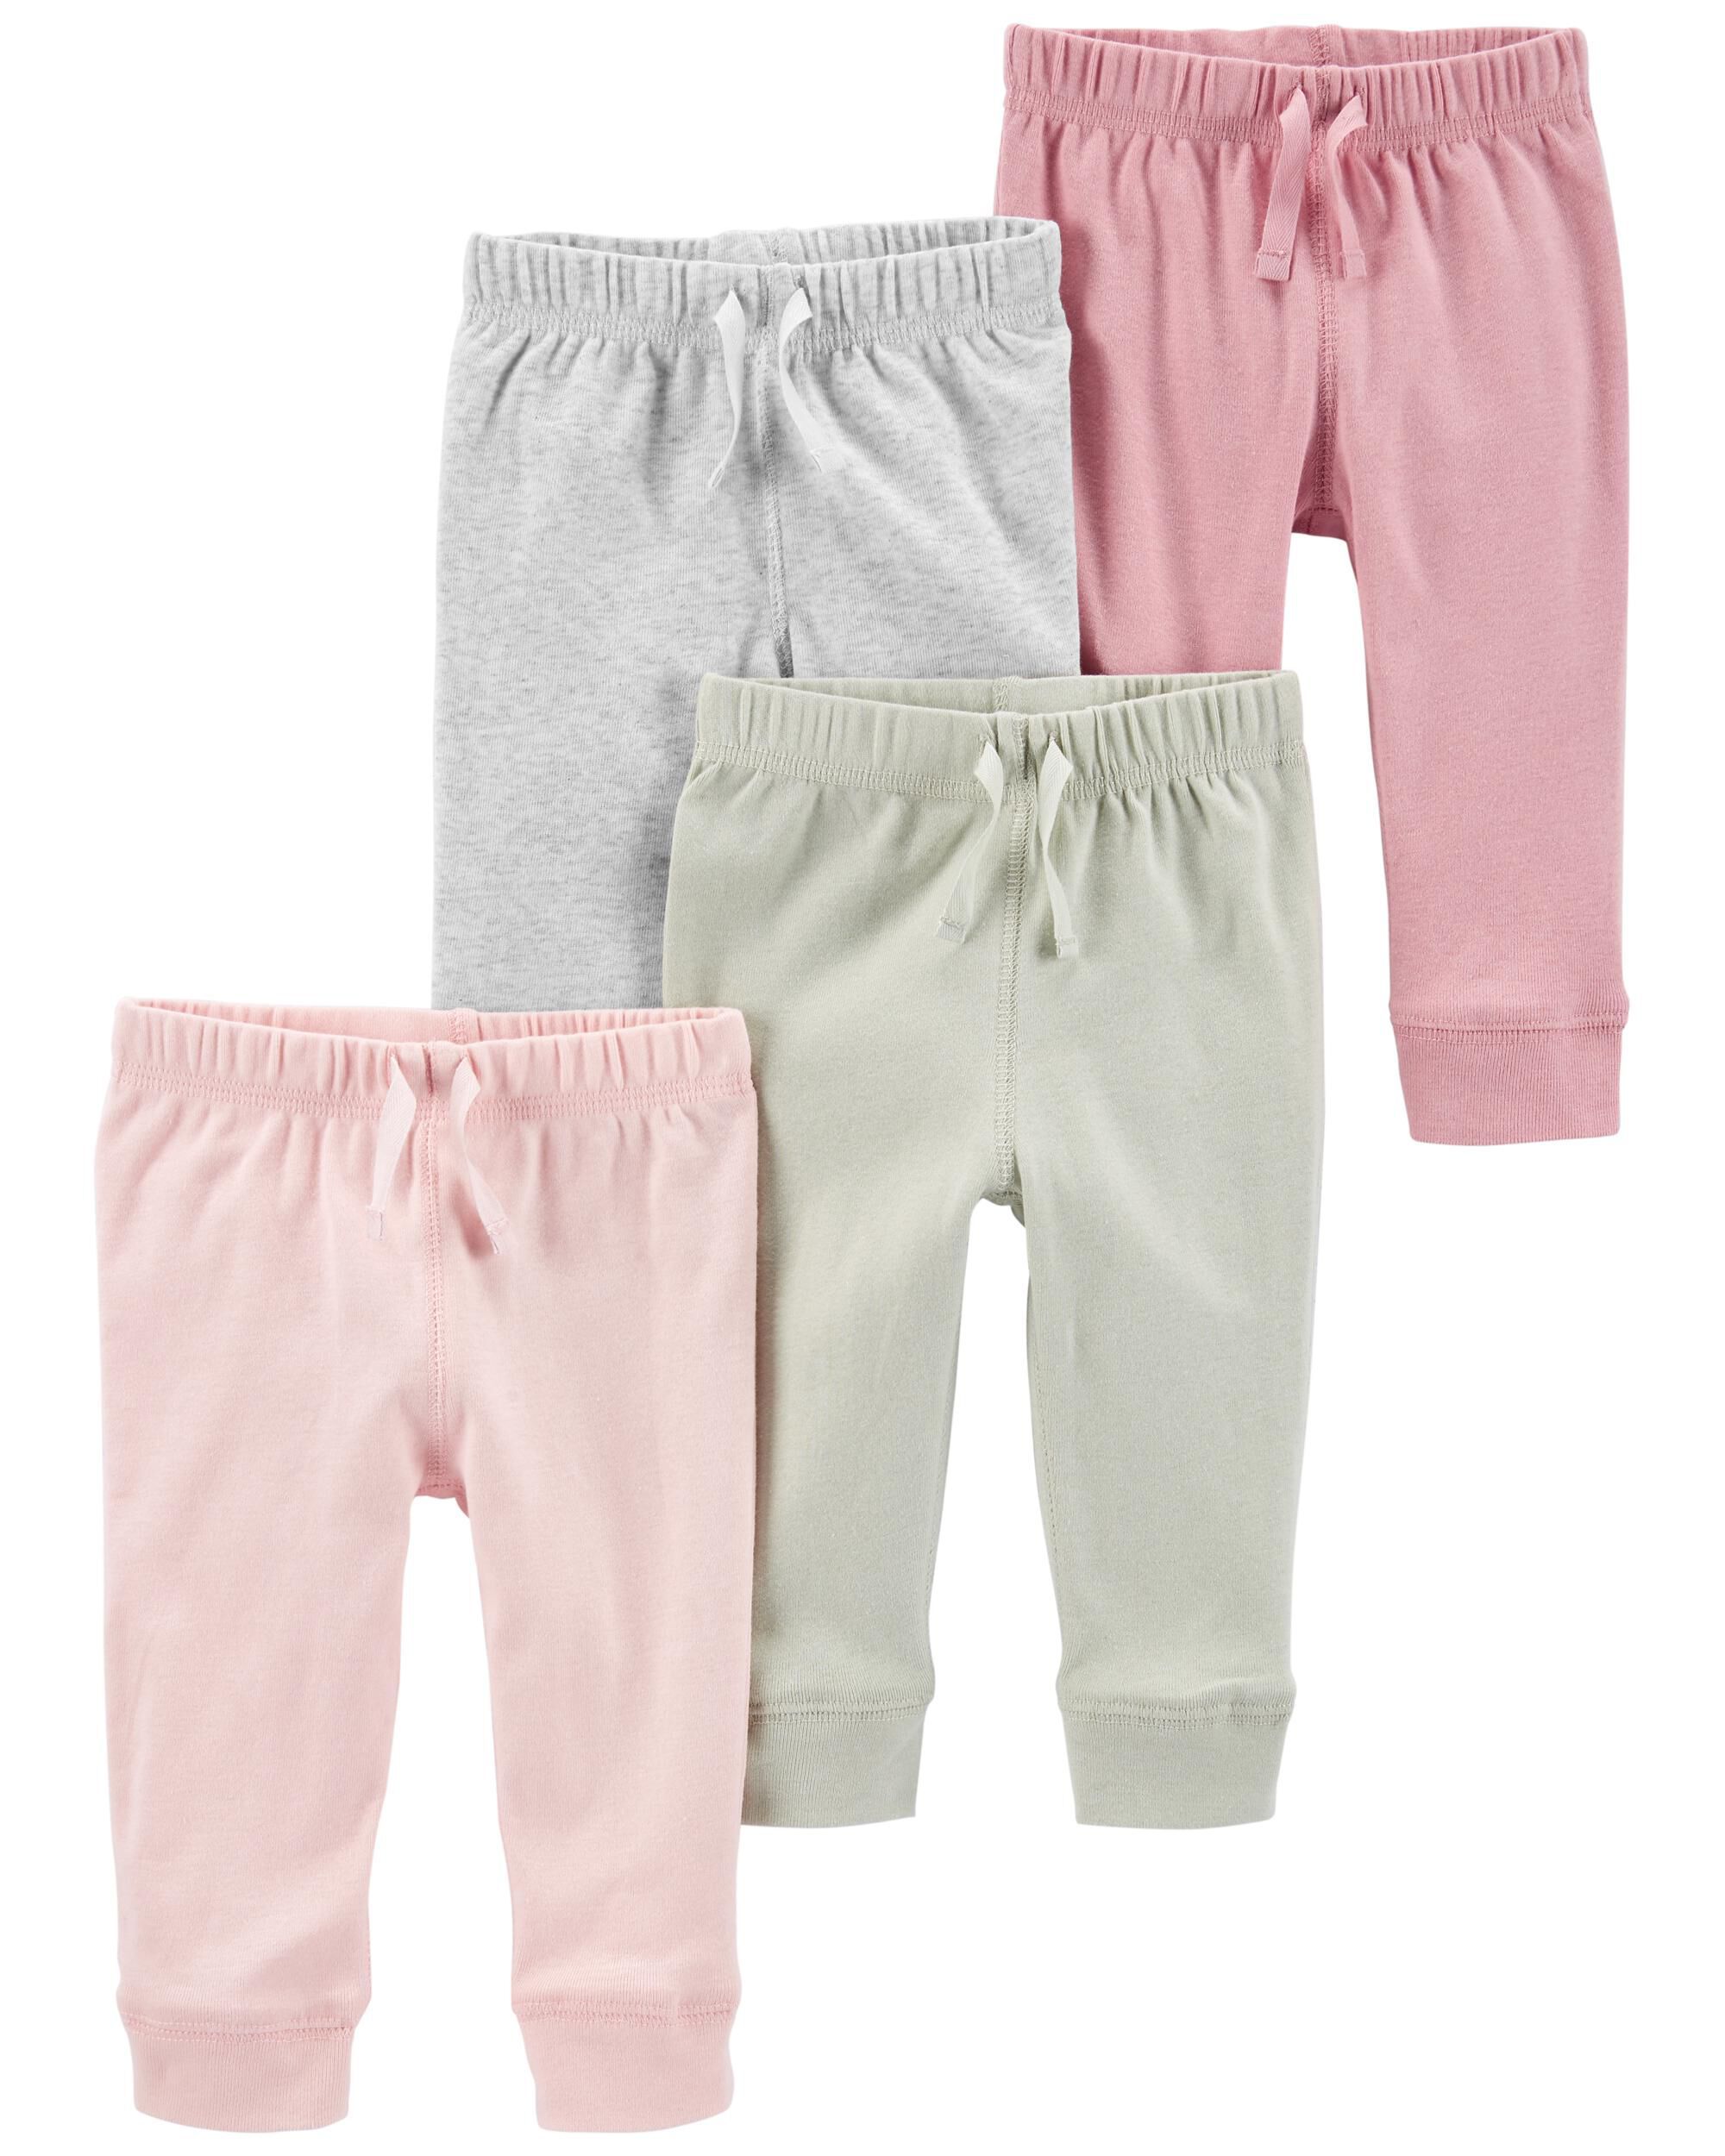 Baby 4-Pack Cotton Pants | Carter's